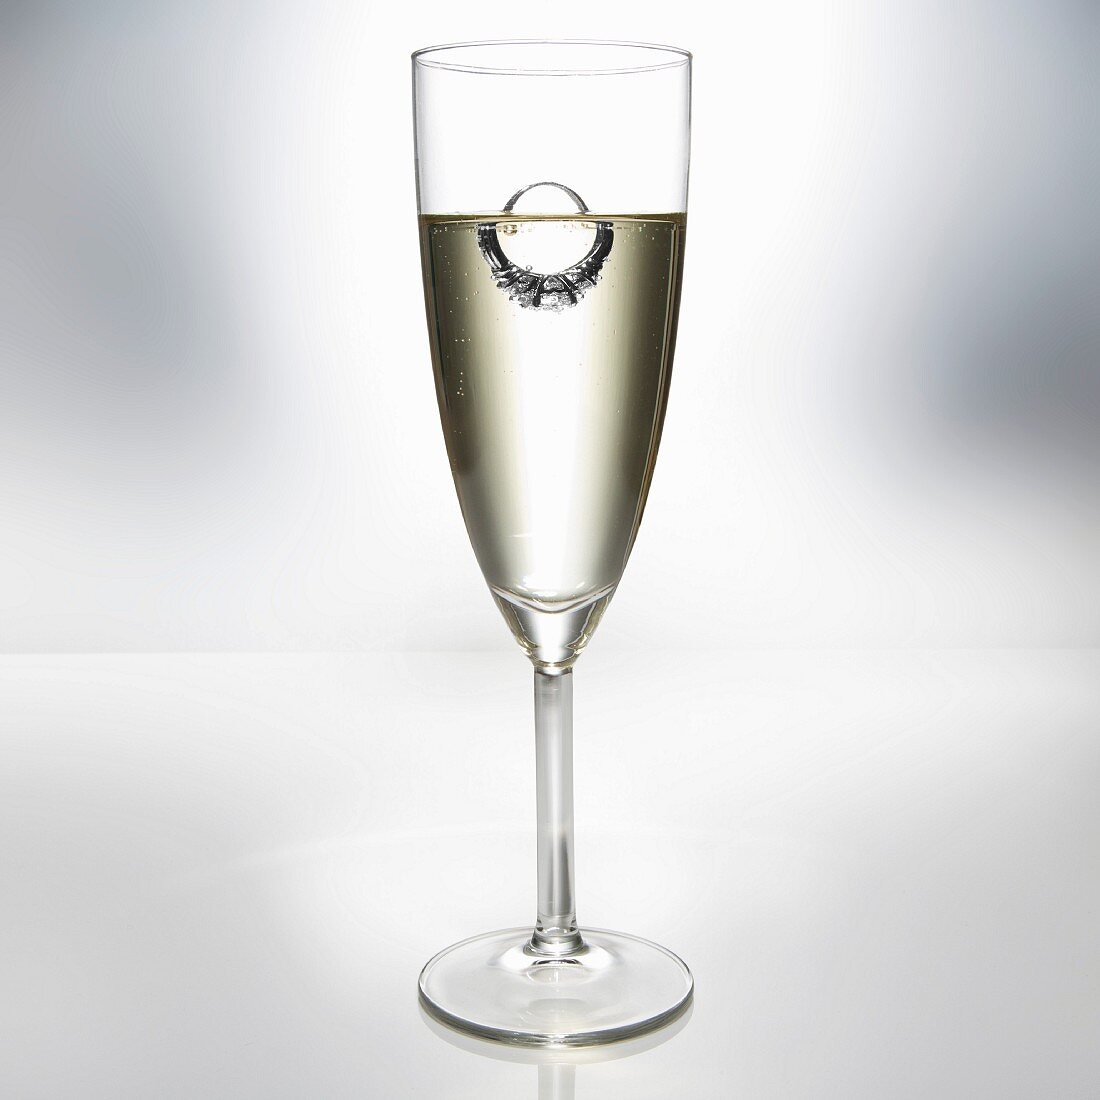 Diamond Ring Floating in Glass of Champagne